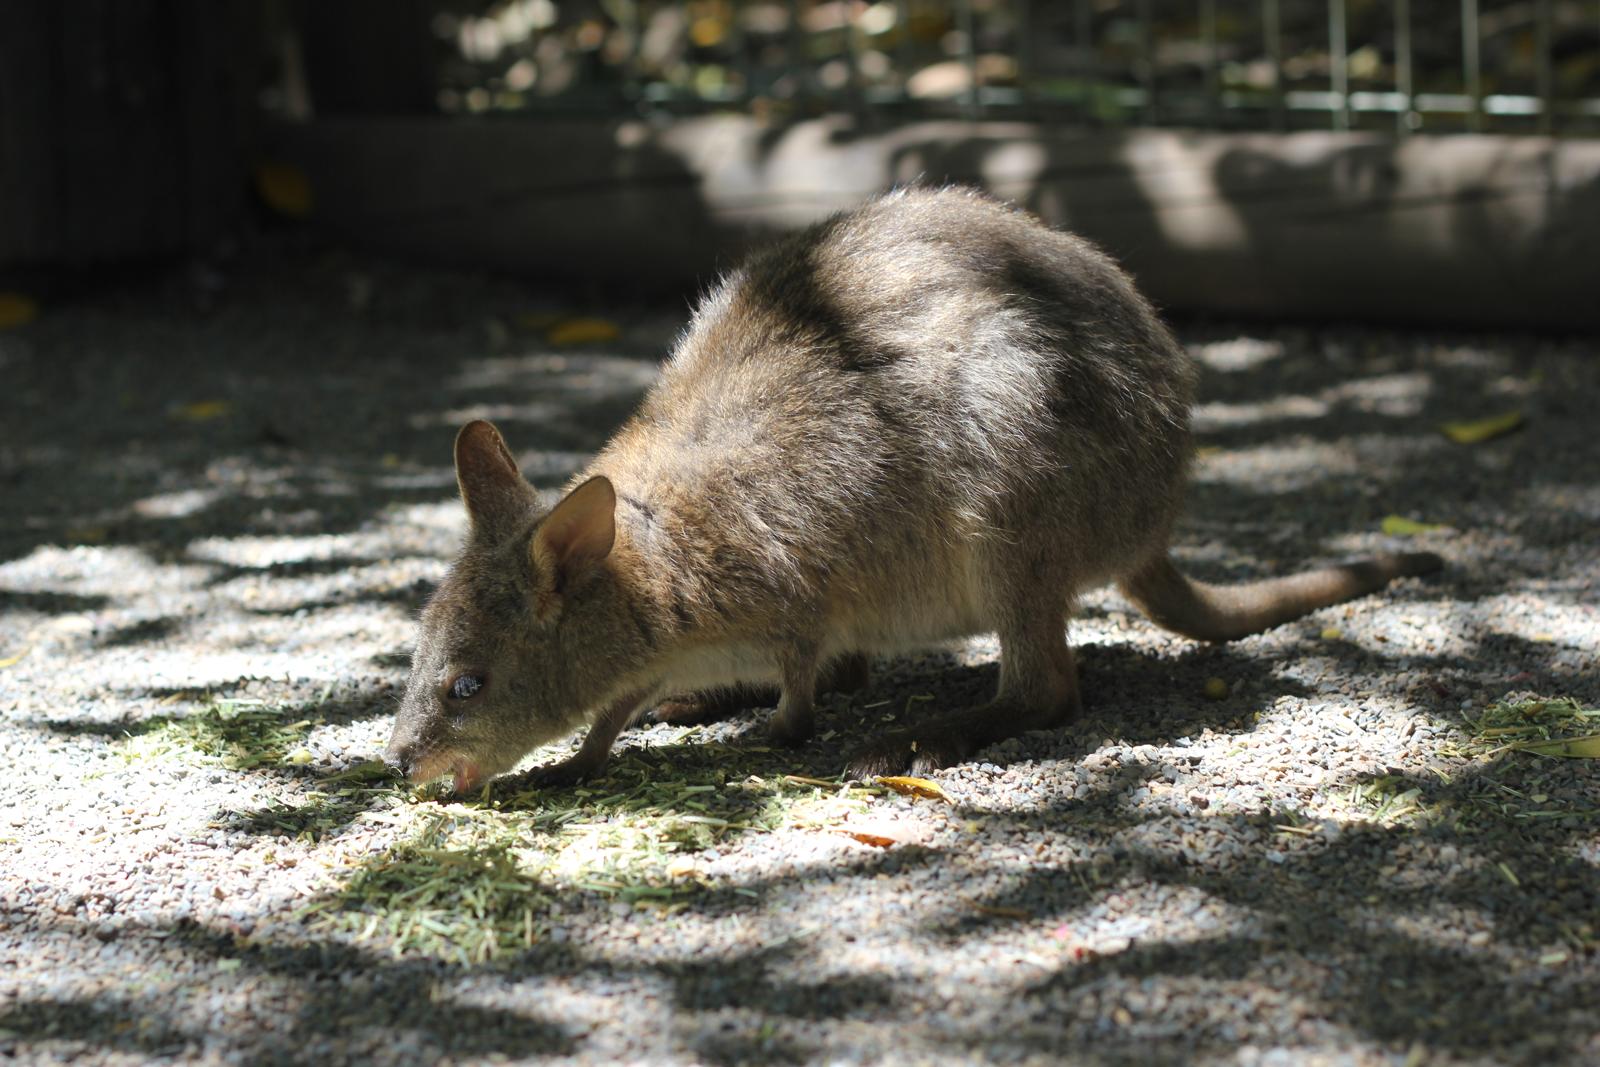 I think this is a wallabee